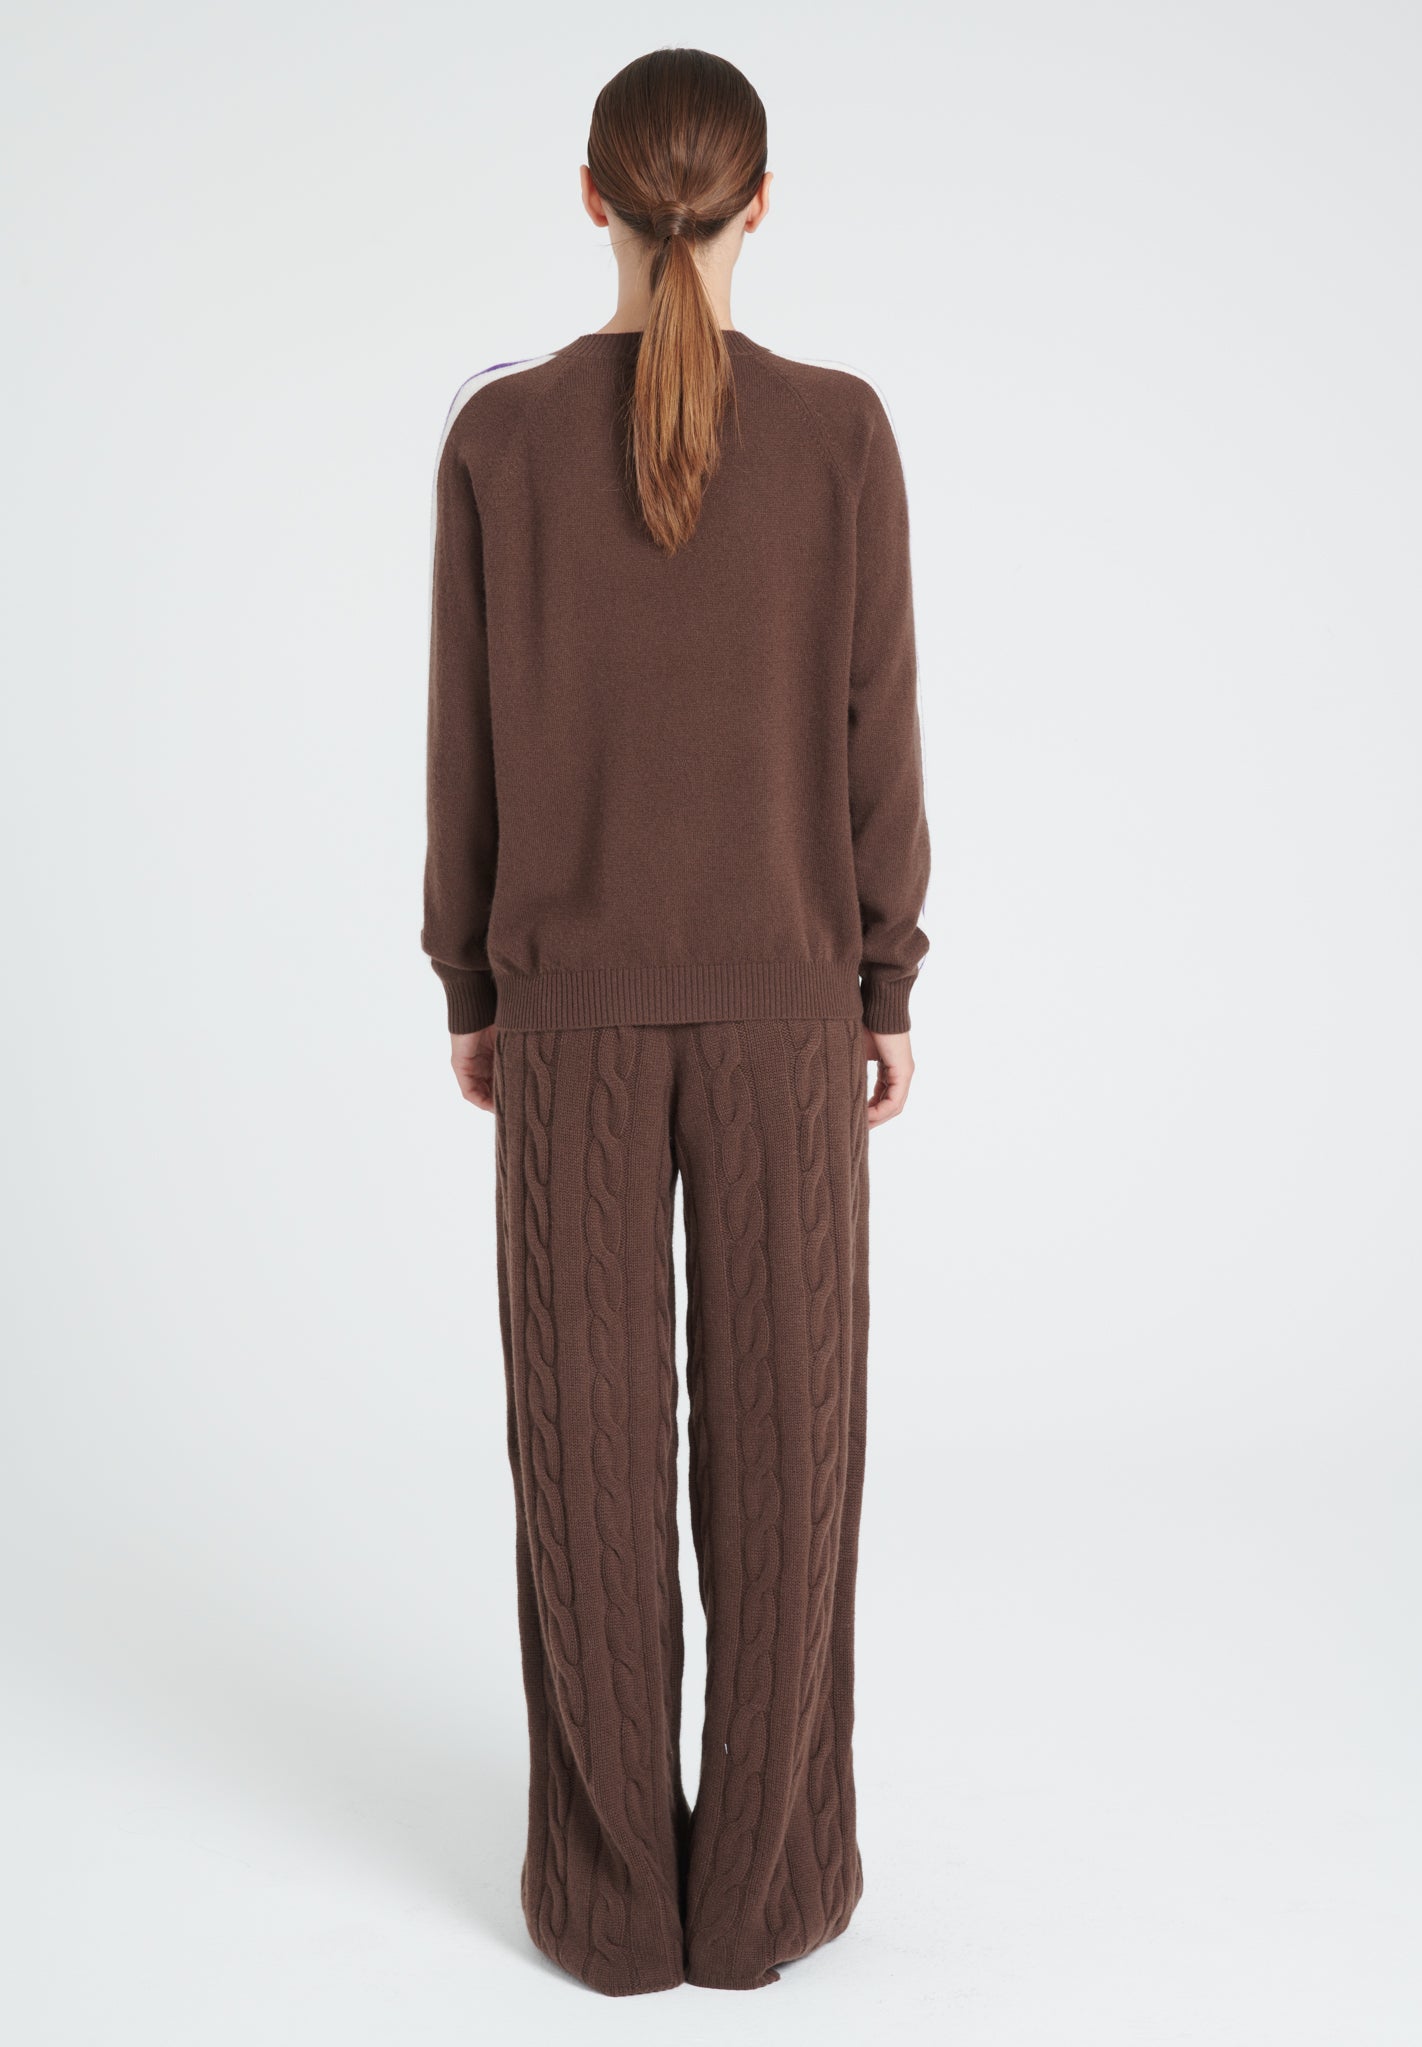 ZAYA 19 Round neck sweater with colored stripe on the sleeves in brown cashmere